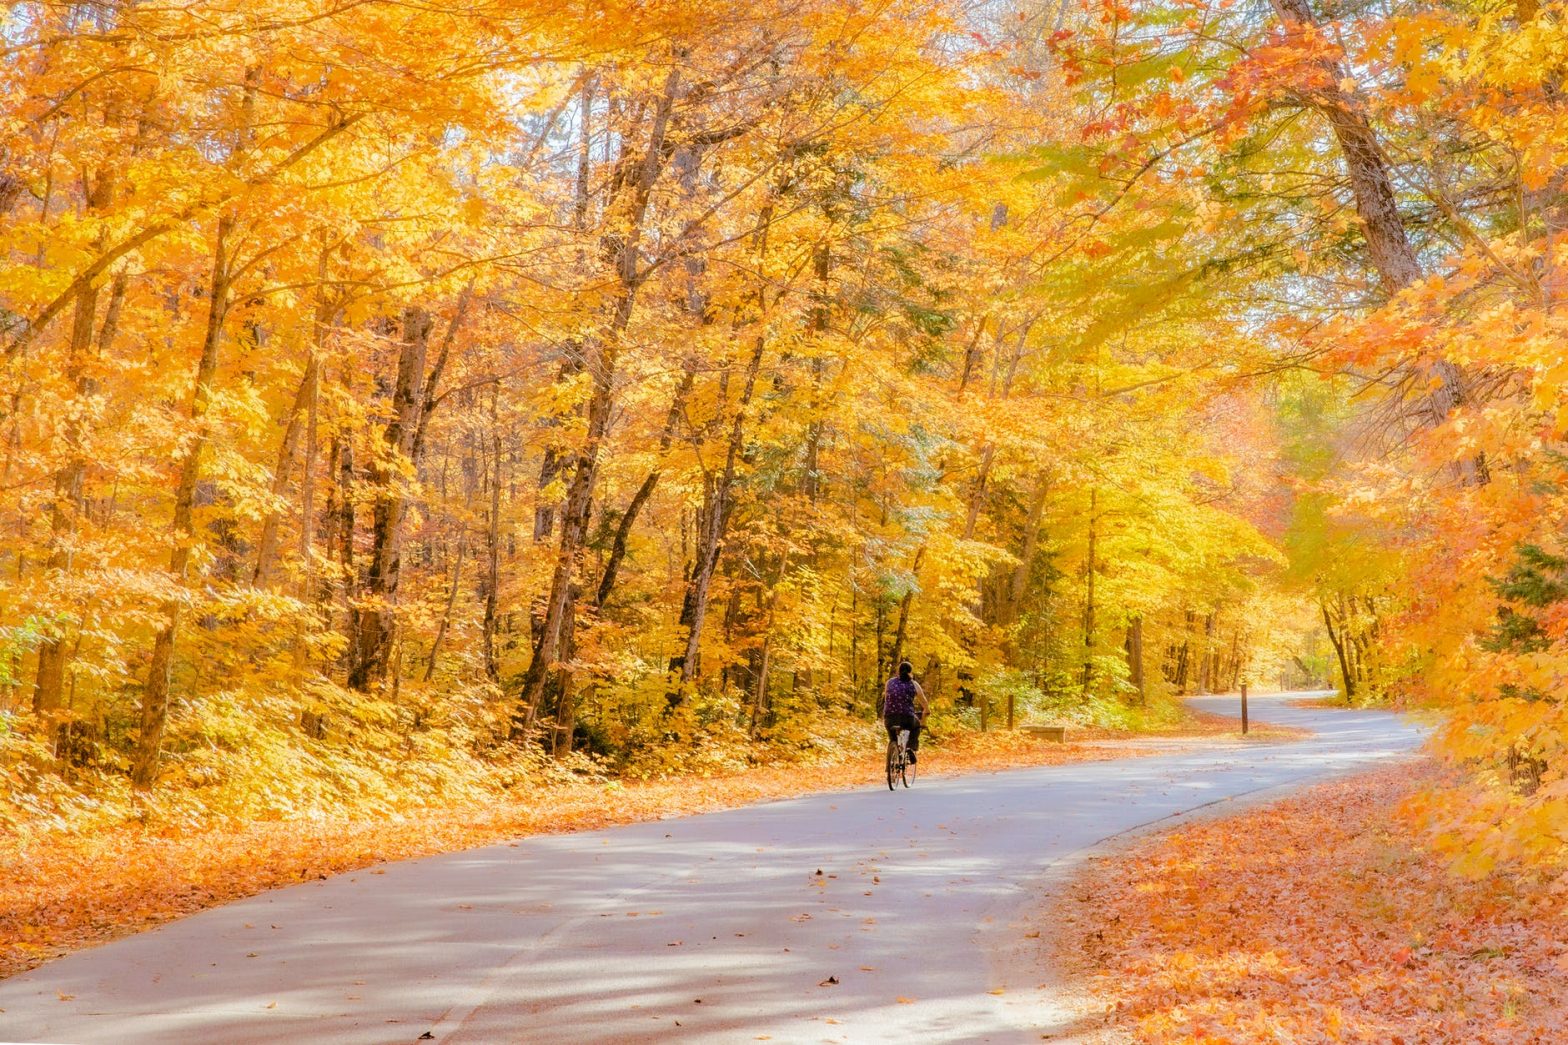 person riding a bicycle in the middle of road surrounded with trees